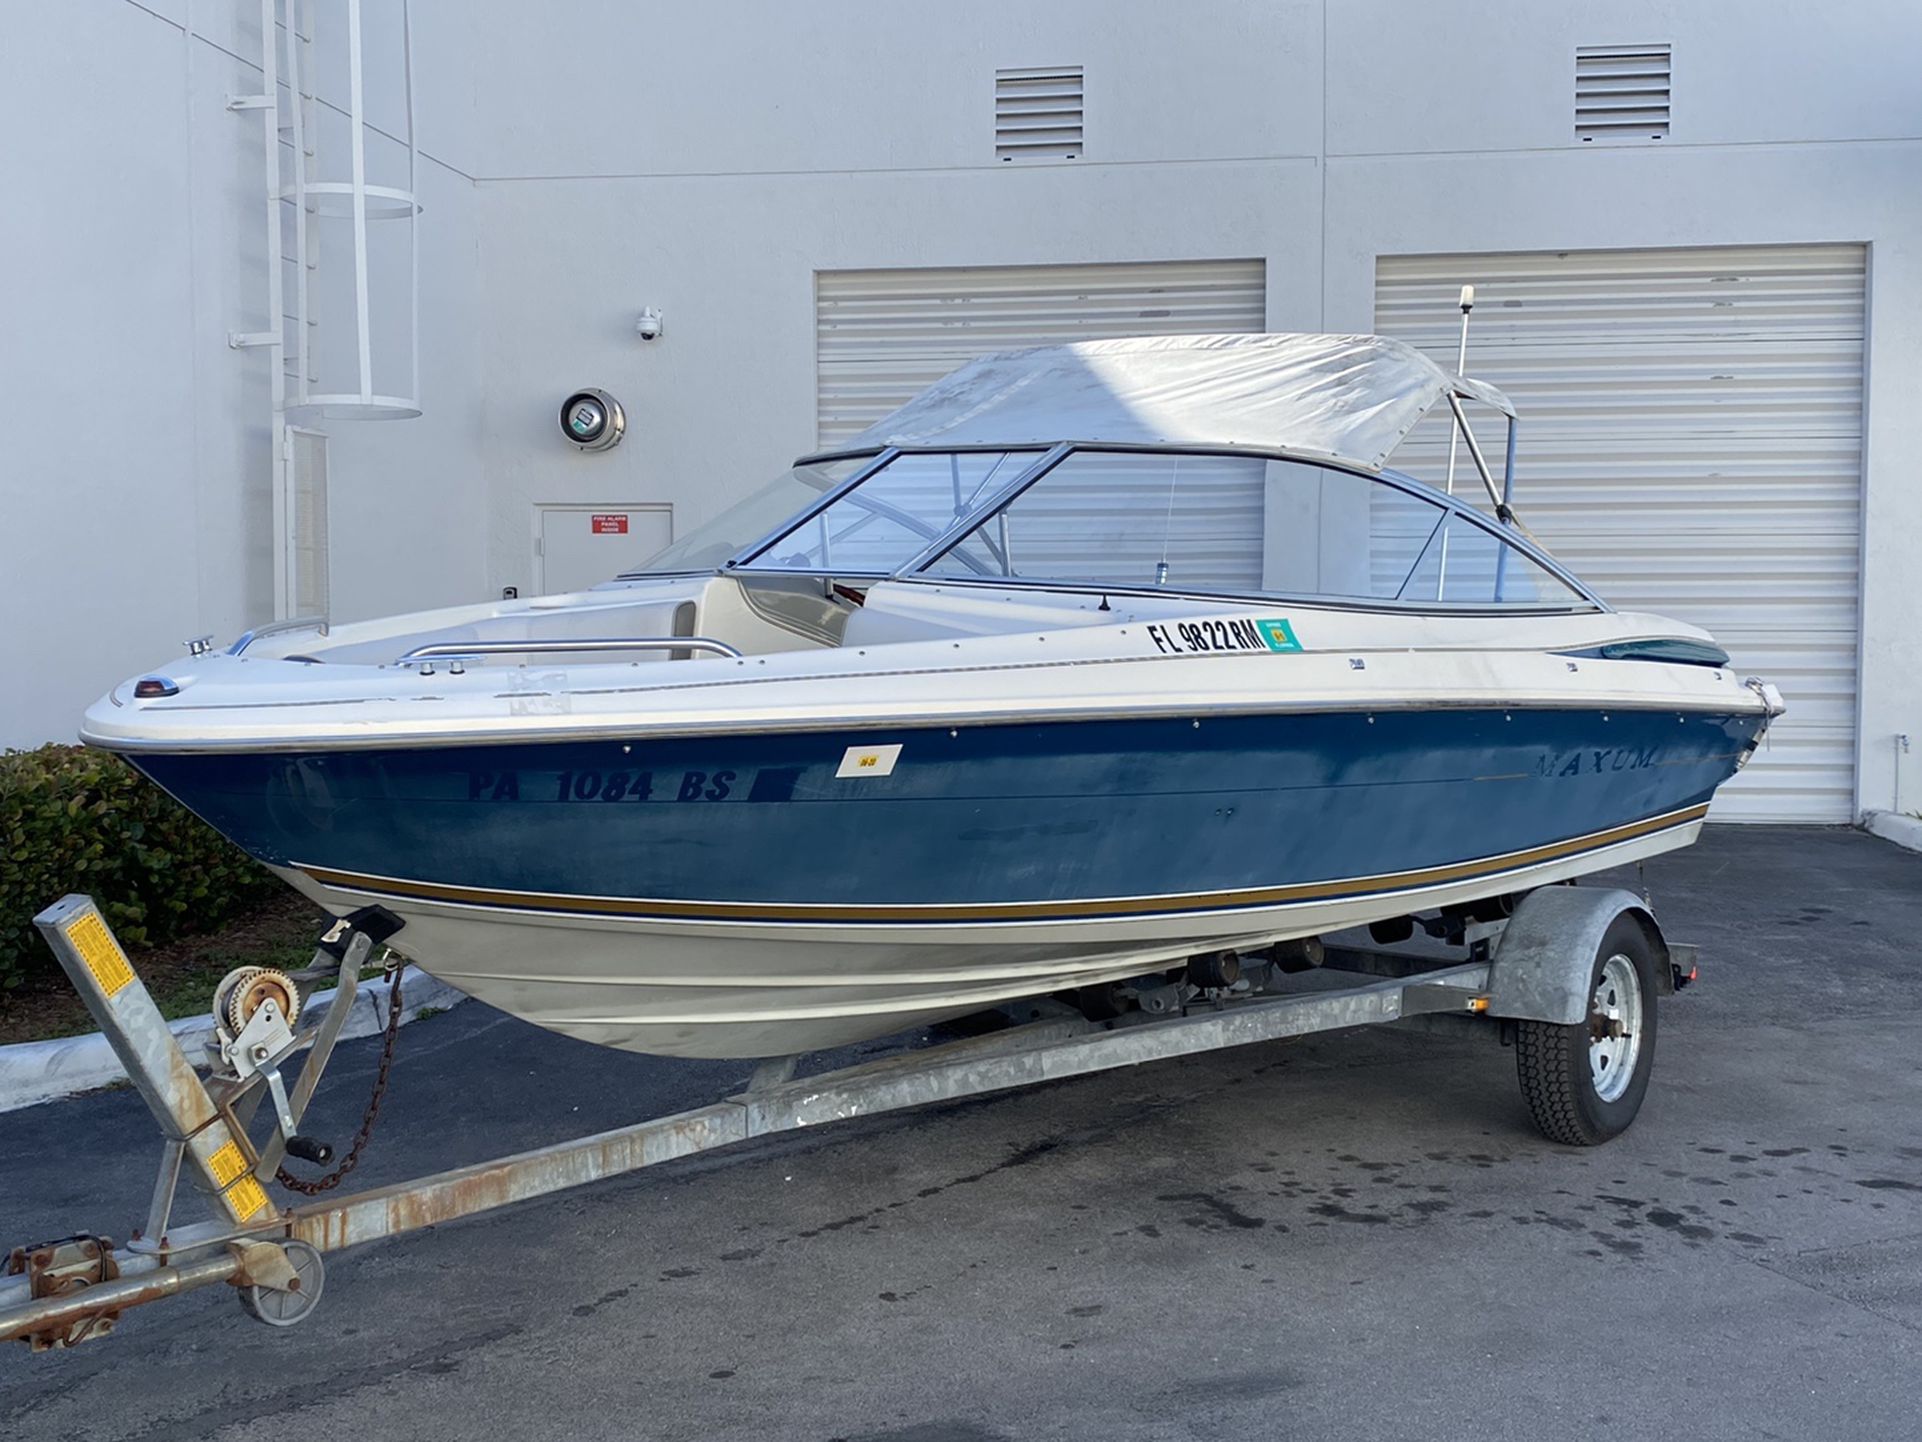 1996 MAXUM MARINE 19’ BOAT, NO ISSUES, READY FOR WATER!